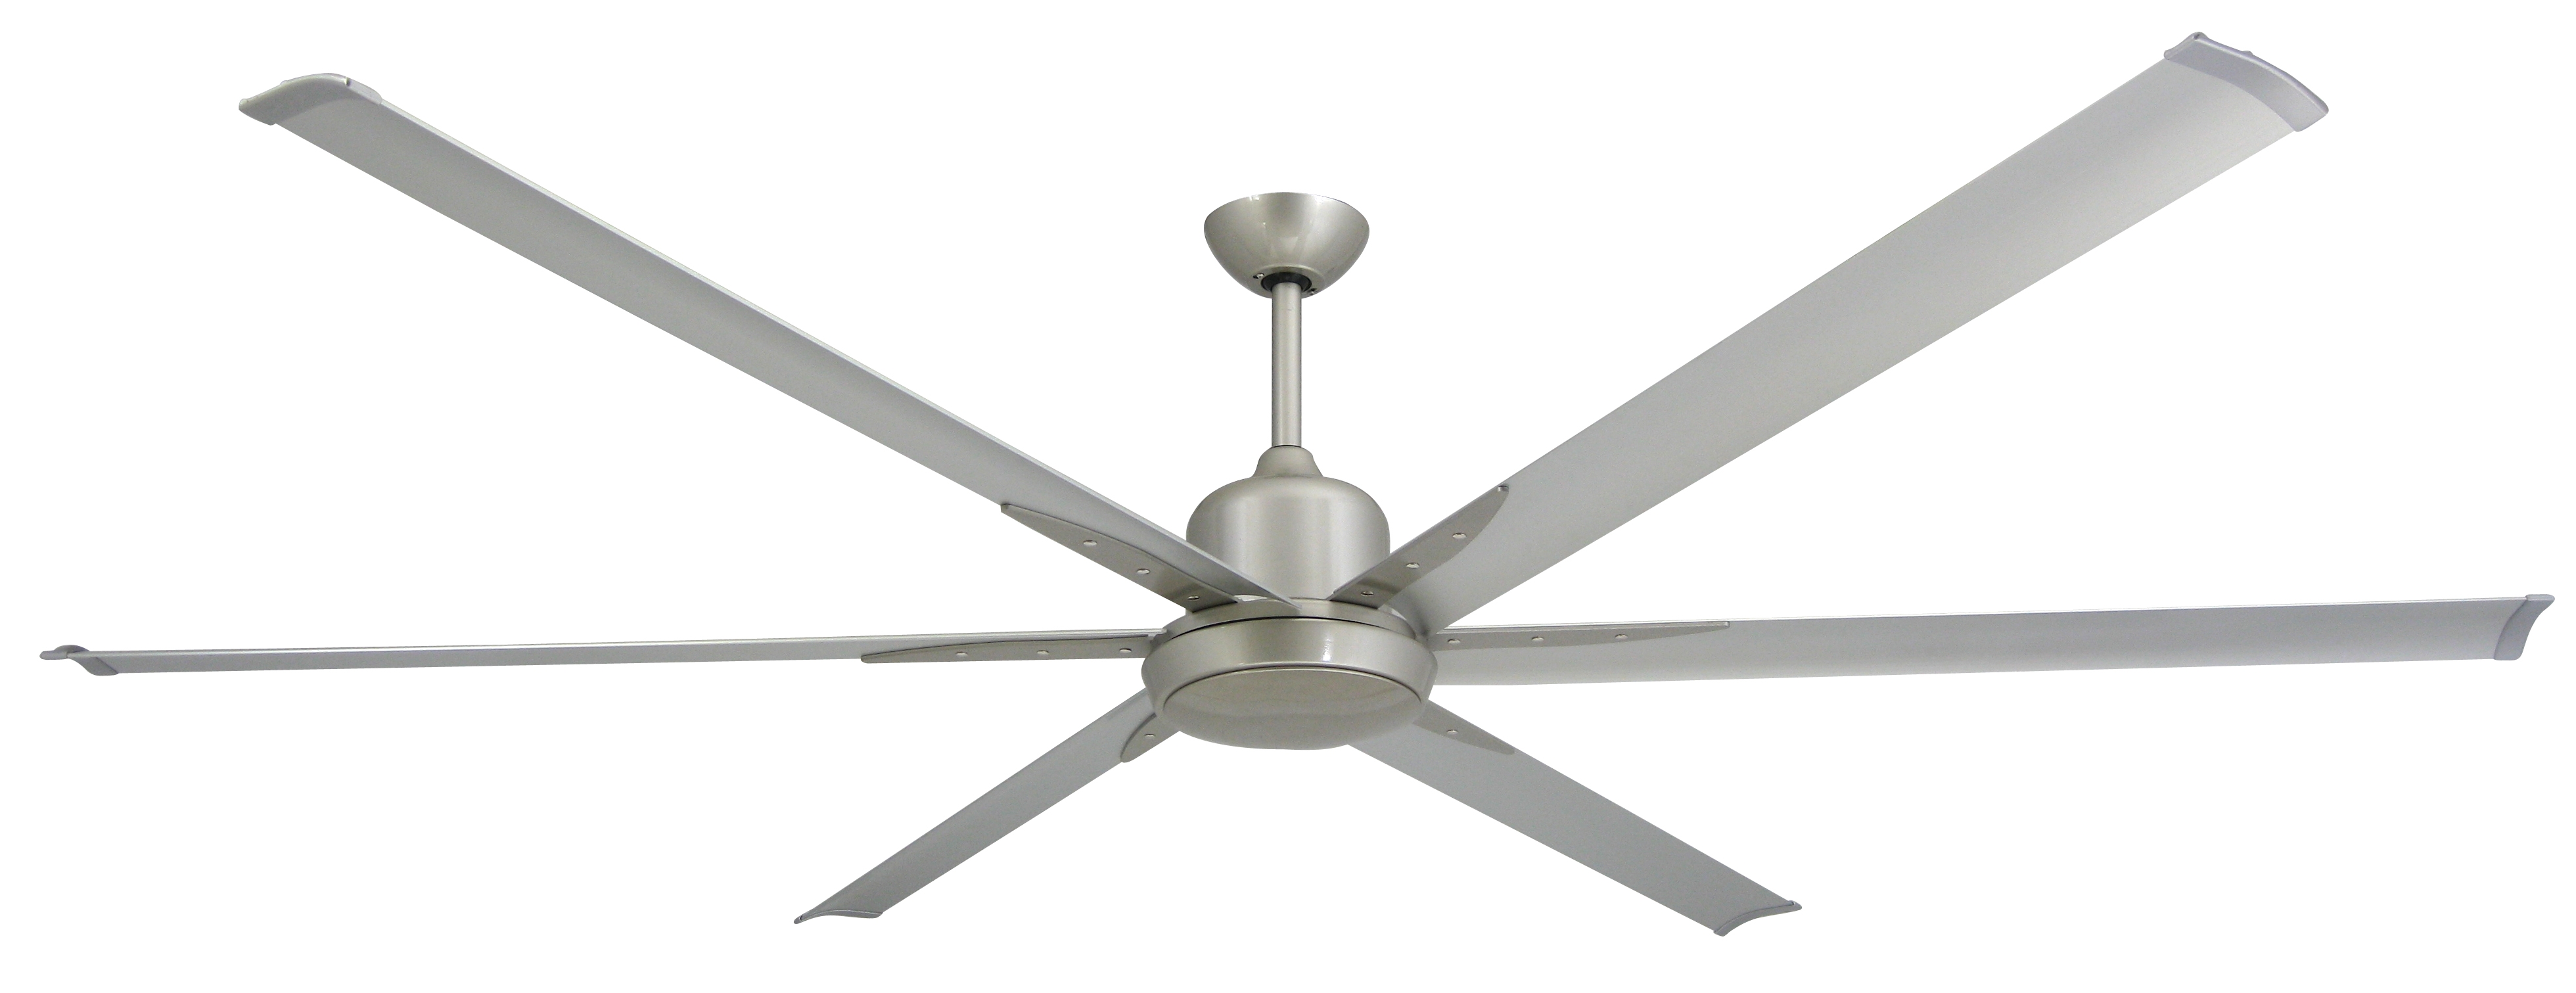 Permalink to Oversized Ceiling Fans With Lights